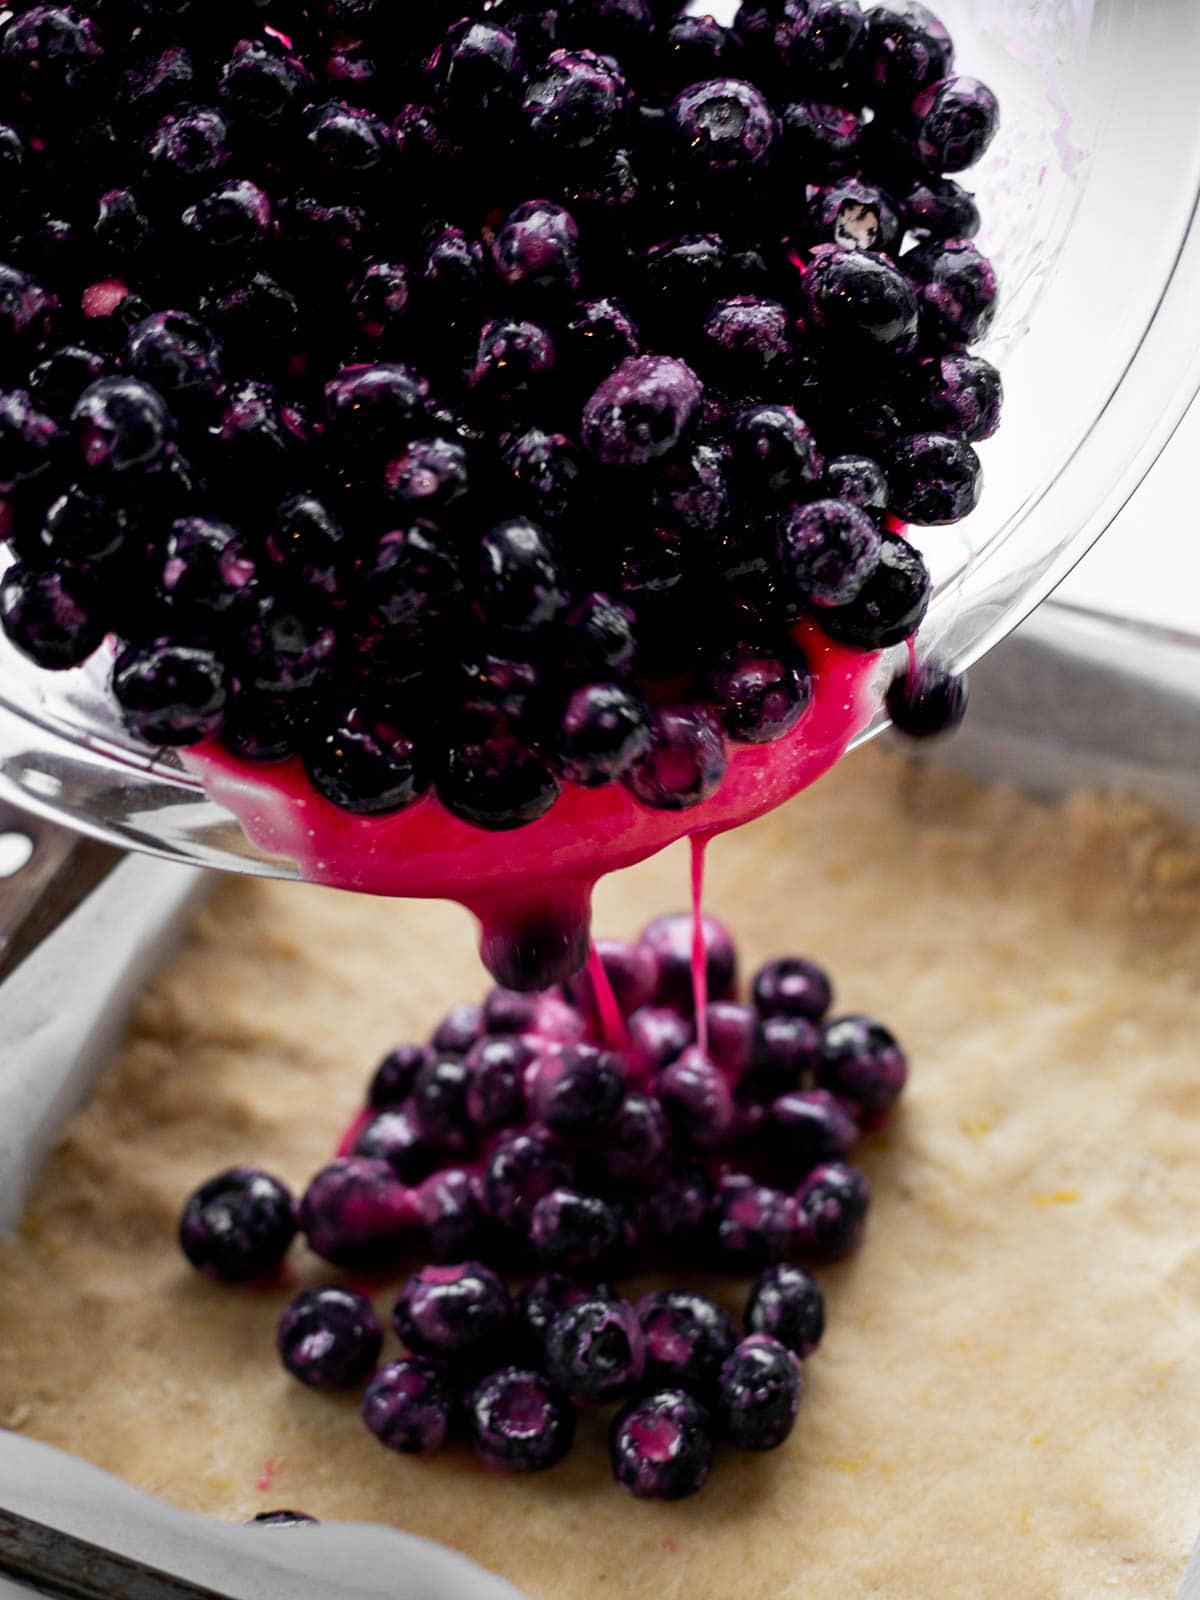 macerated blueberries pouring out of a bowl onto shortbread crust.